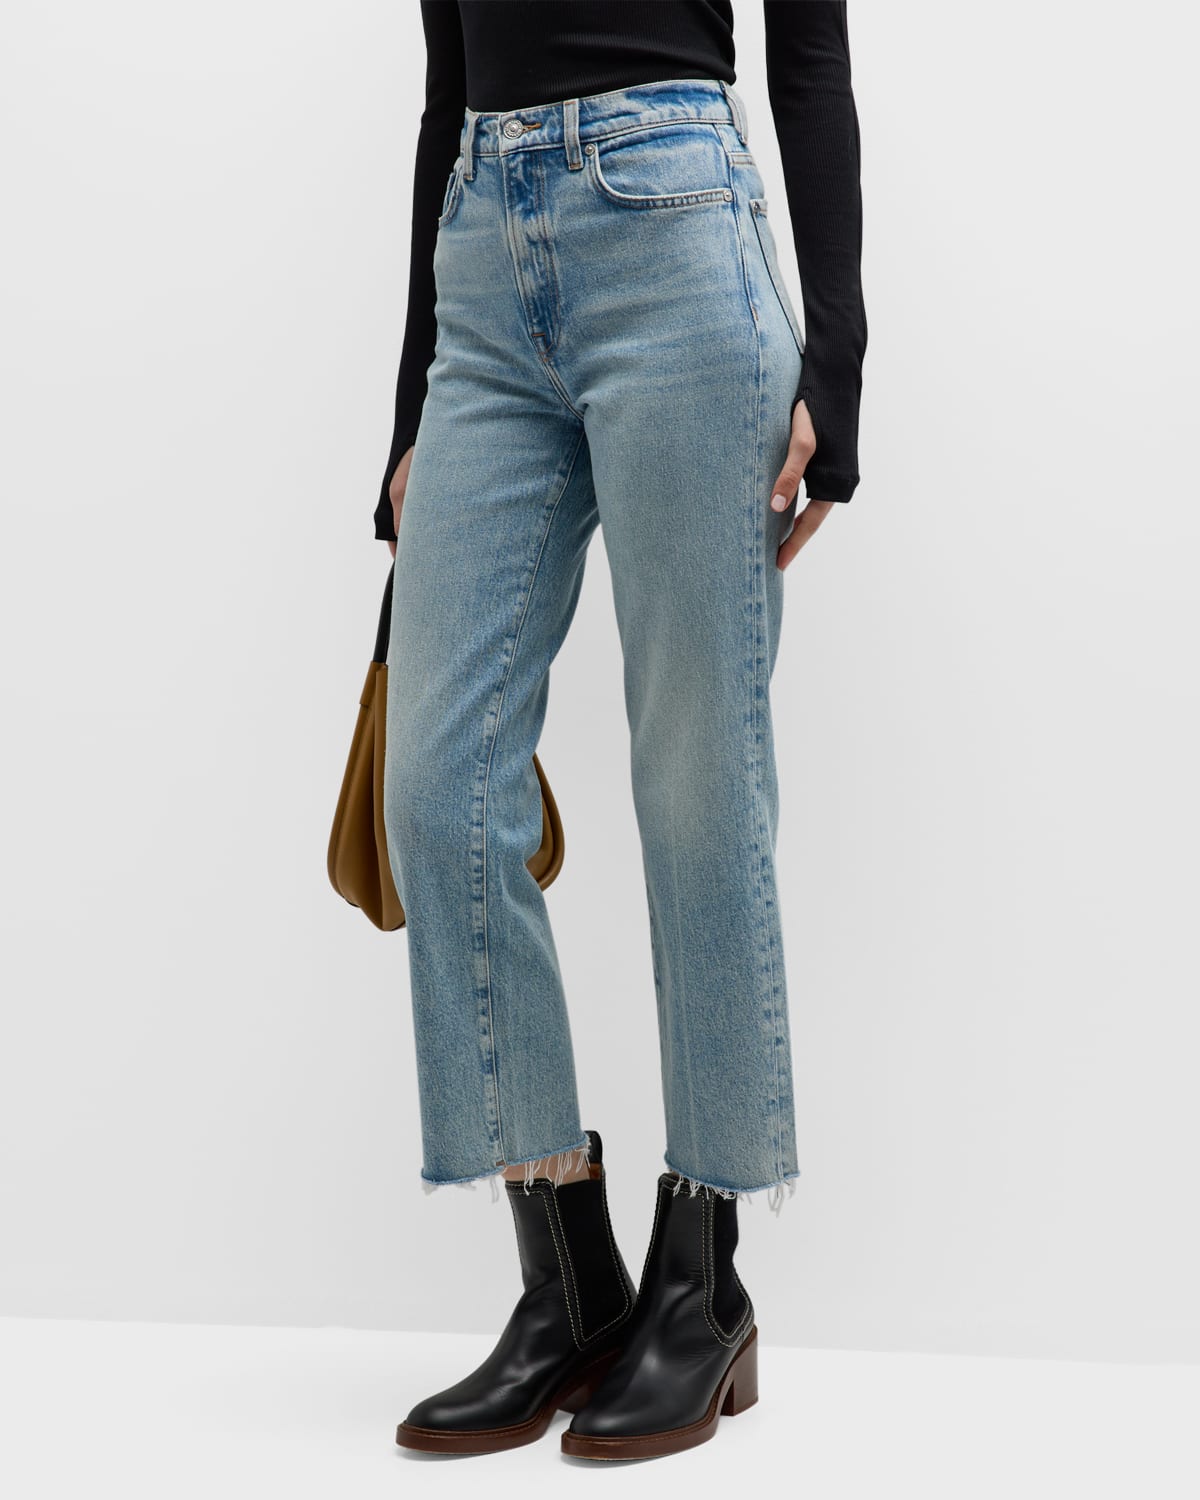 7 FOR ALL MANKIND LOGAN STOVEPIPE RAW HEM CROPPED JEANS